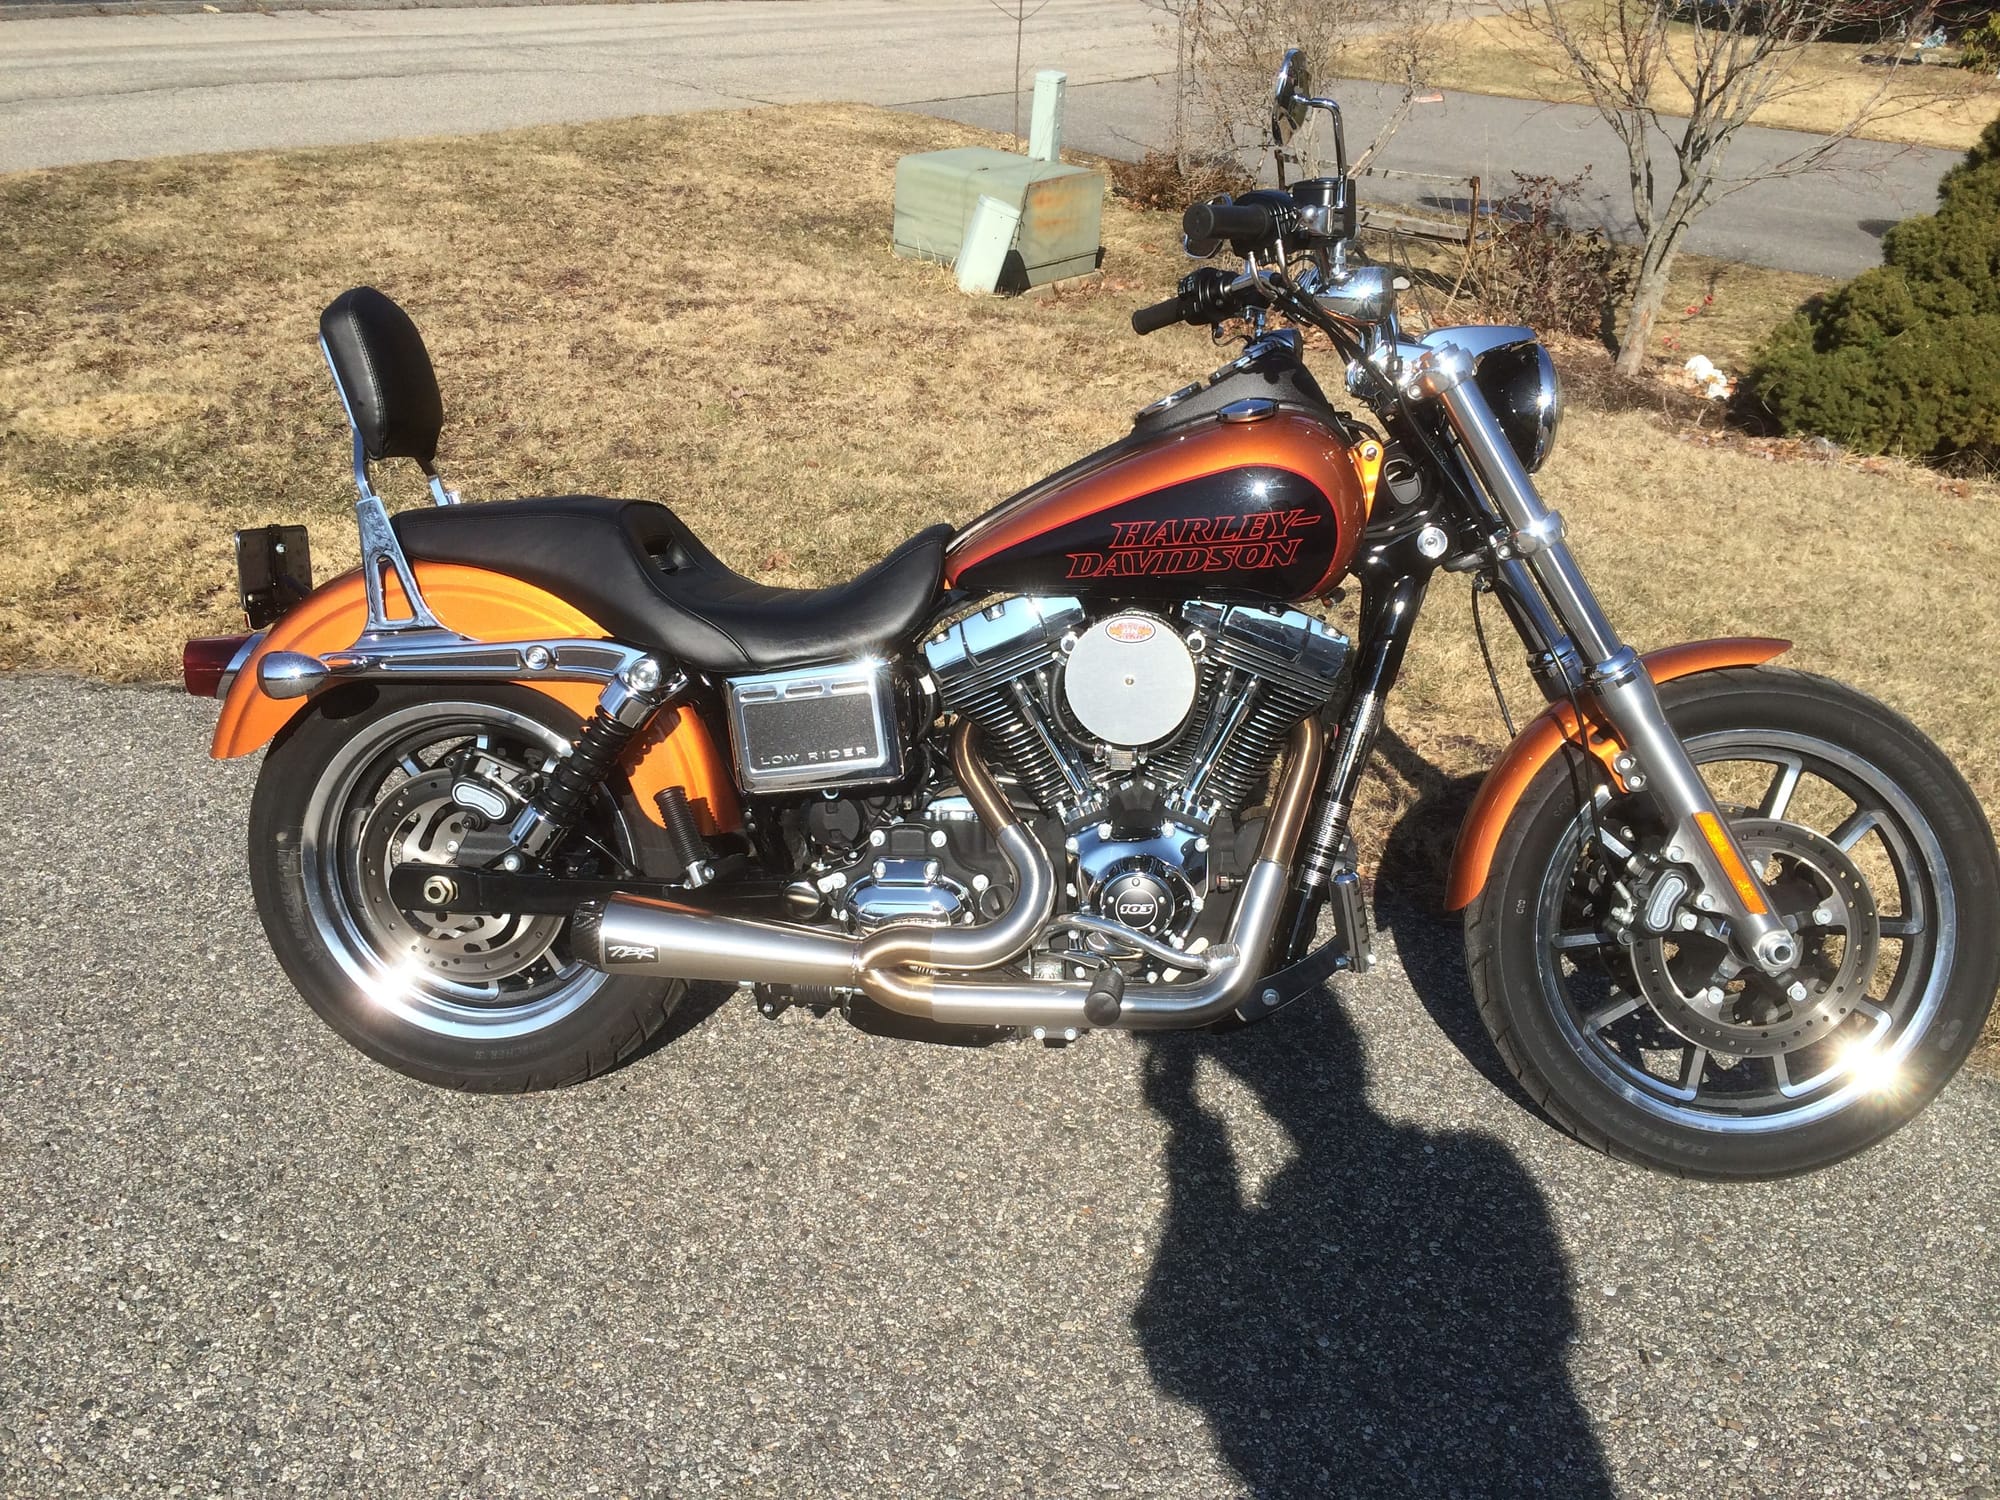 2014 Low Rider - Page 327 - Harley Davidson Forums